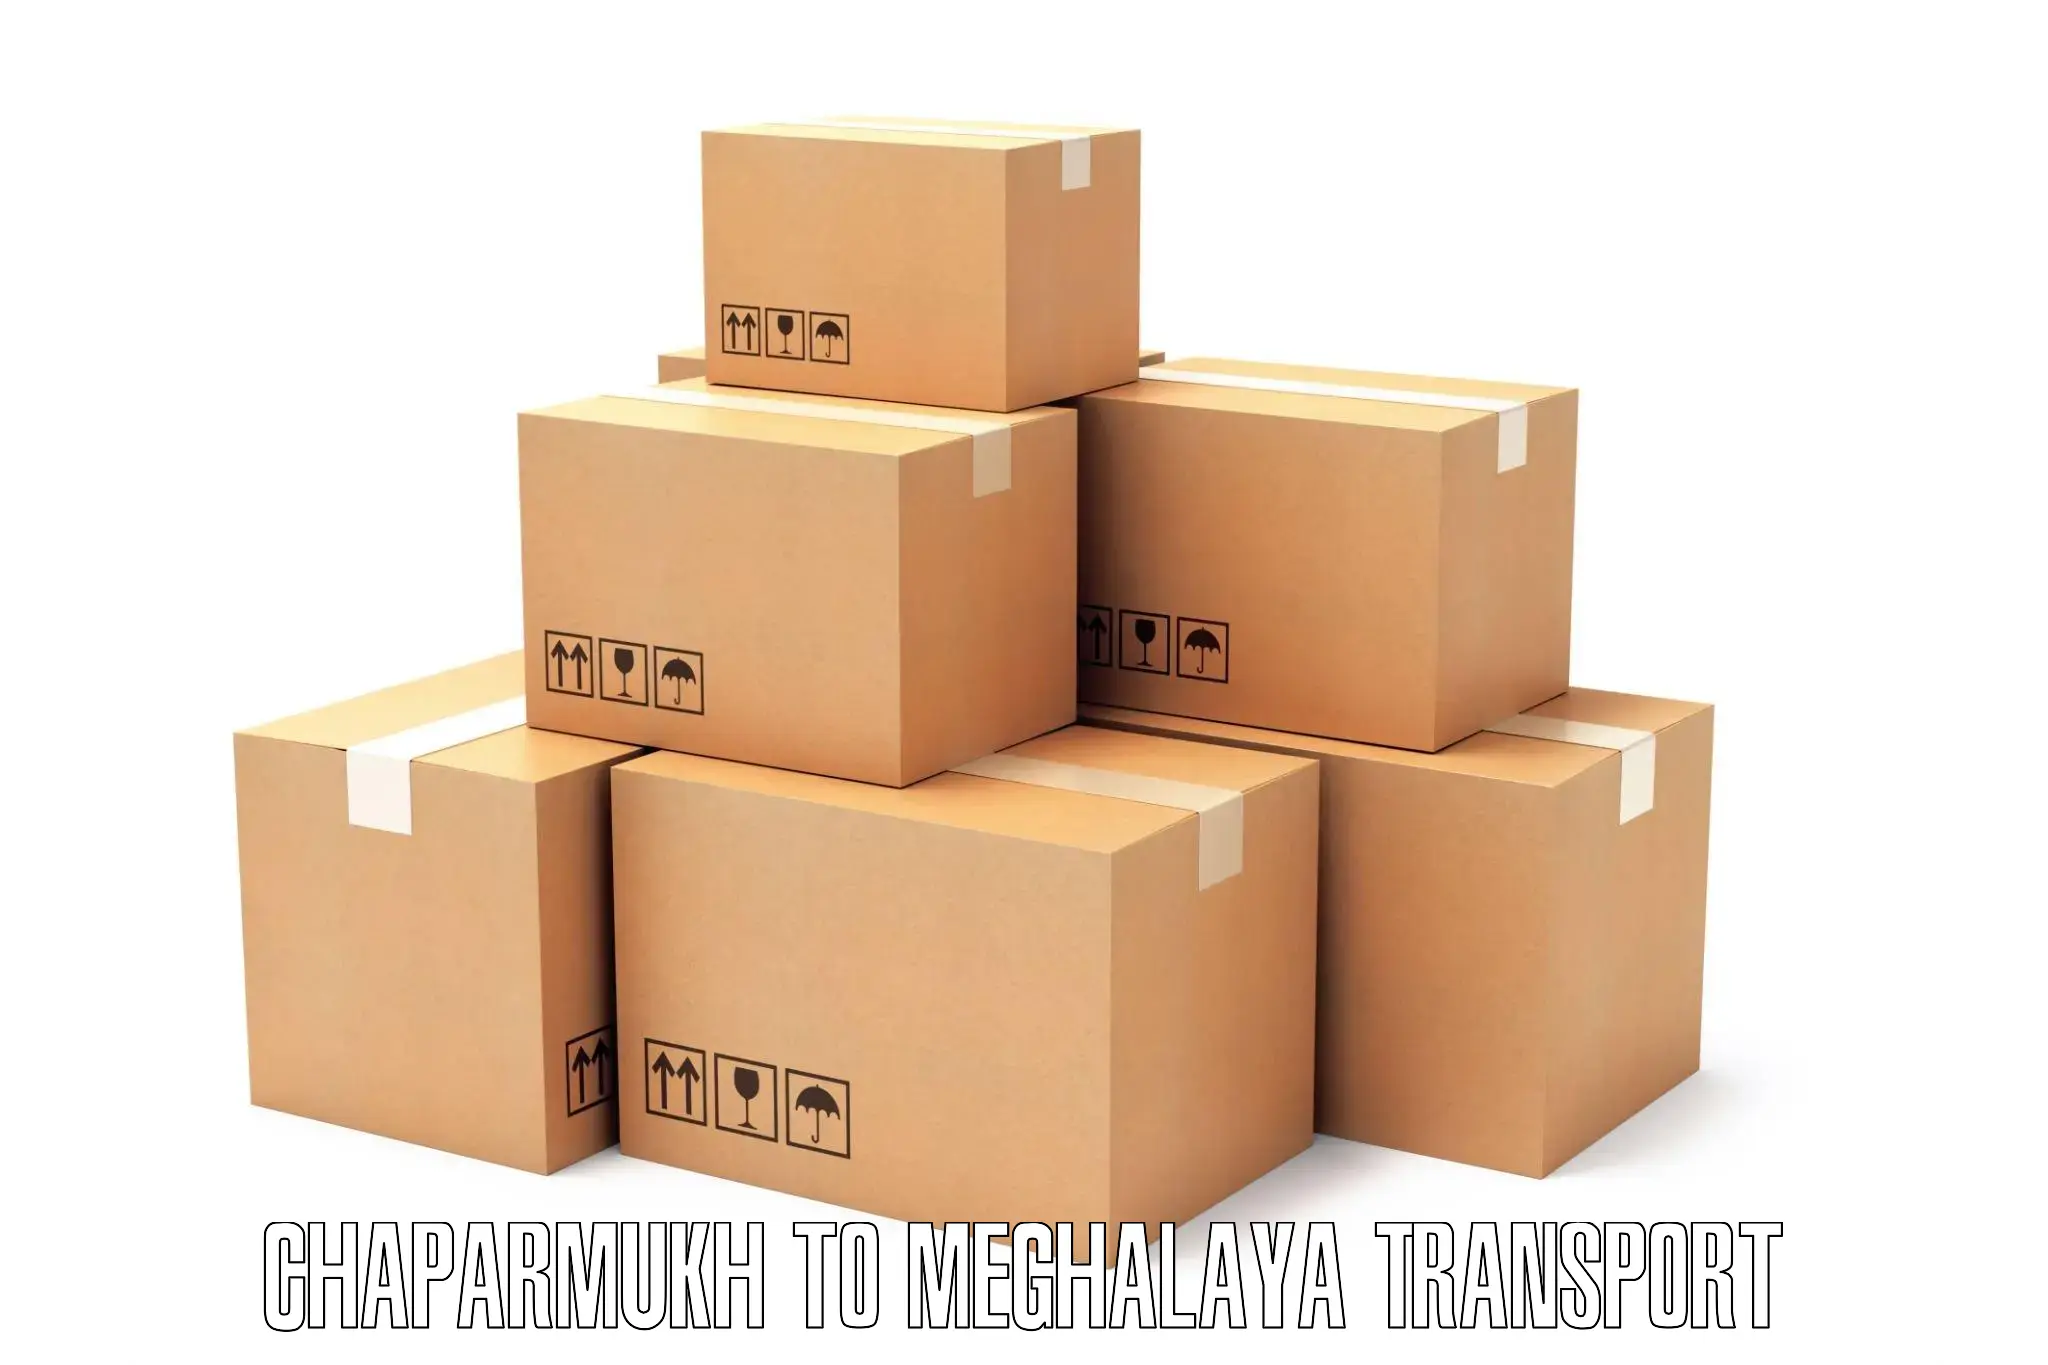 Goods delivery service Chaparmukh to Meghalaya